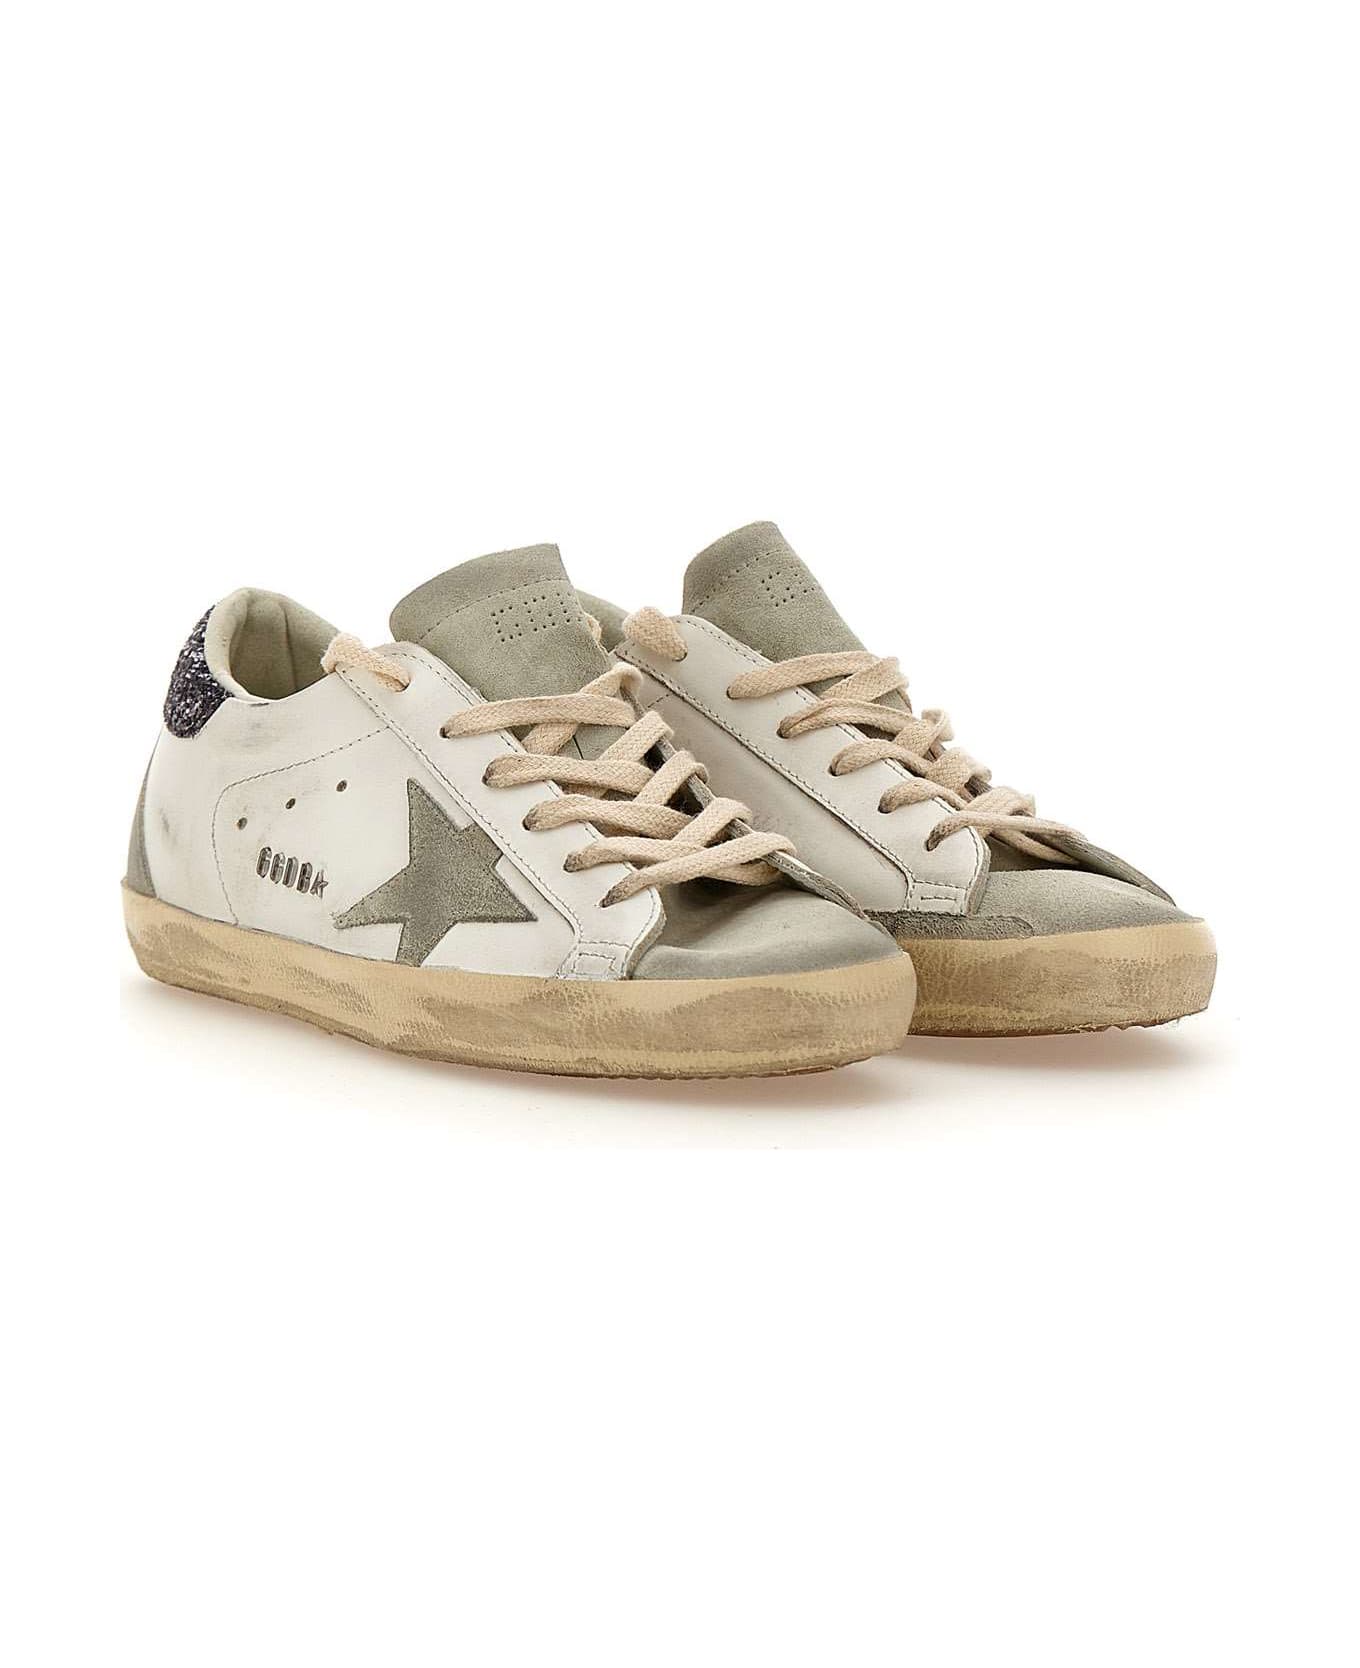 Golden Goose Super Star Classic Leather Sneakers - White/ice/grey